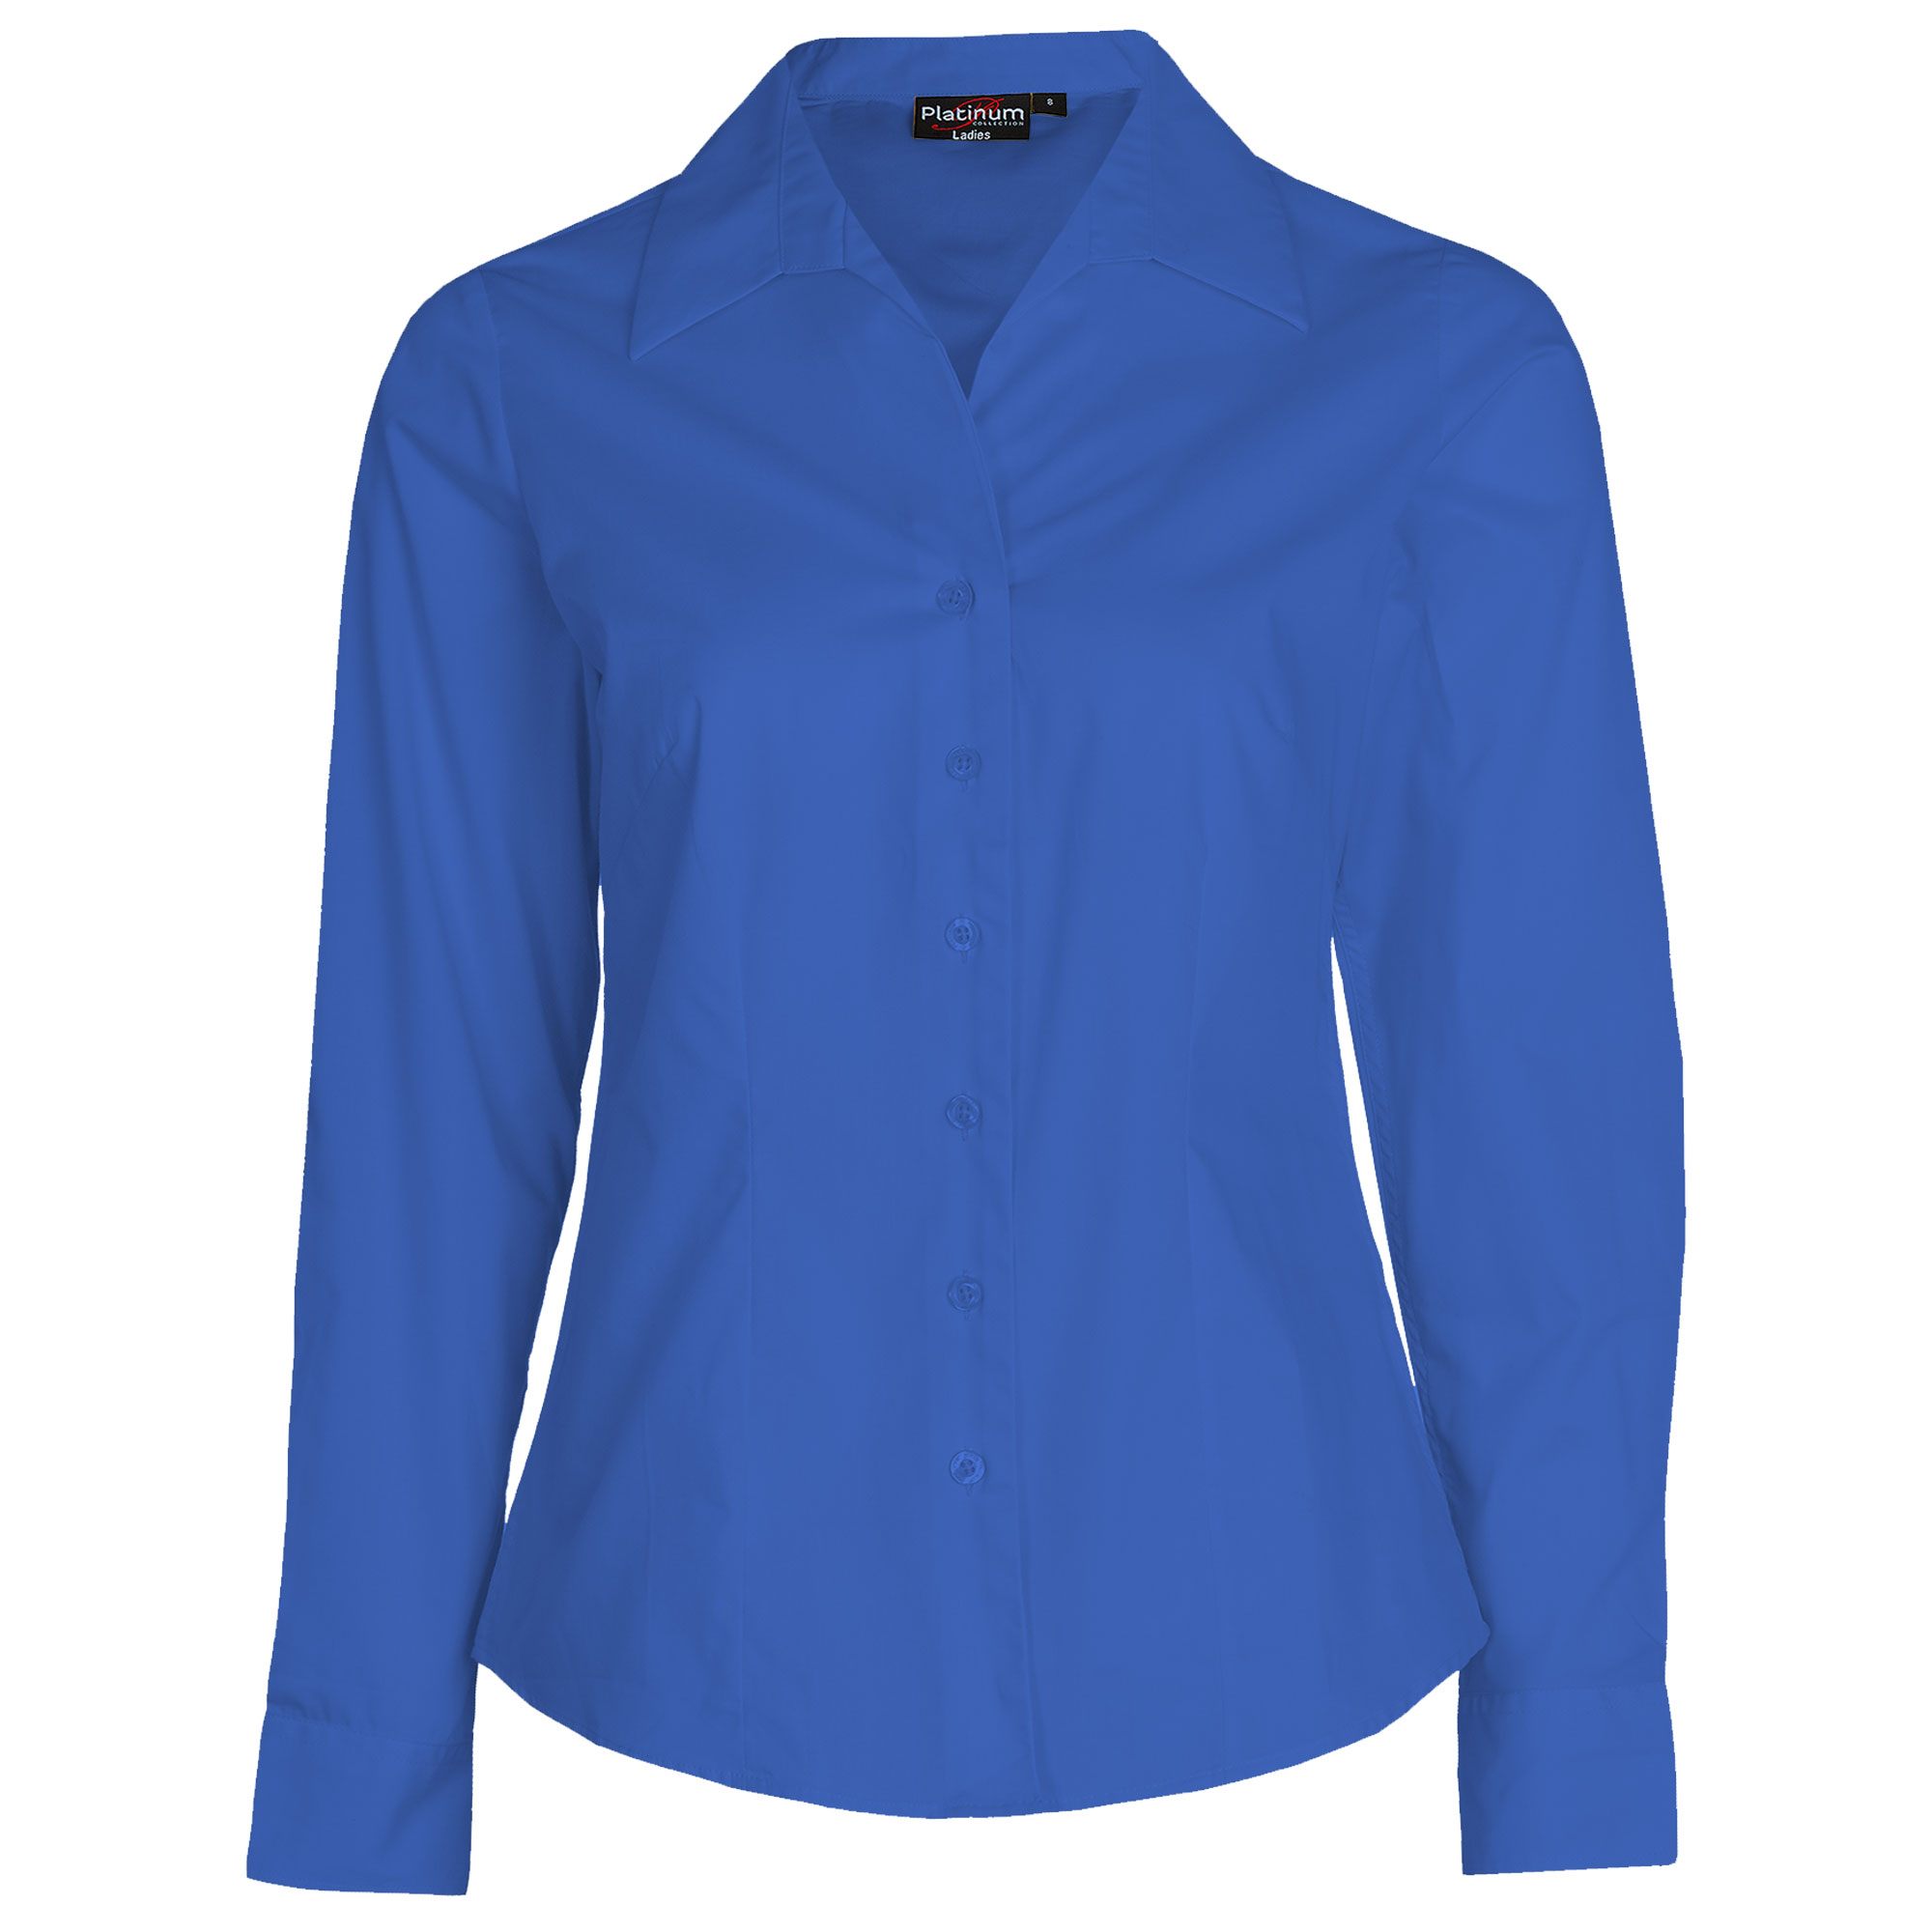 Women's Semi Fitted Work Shirts